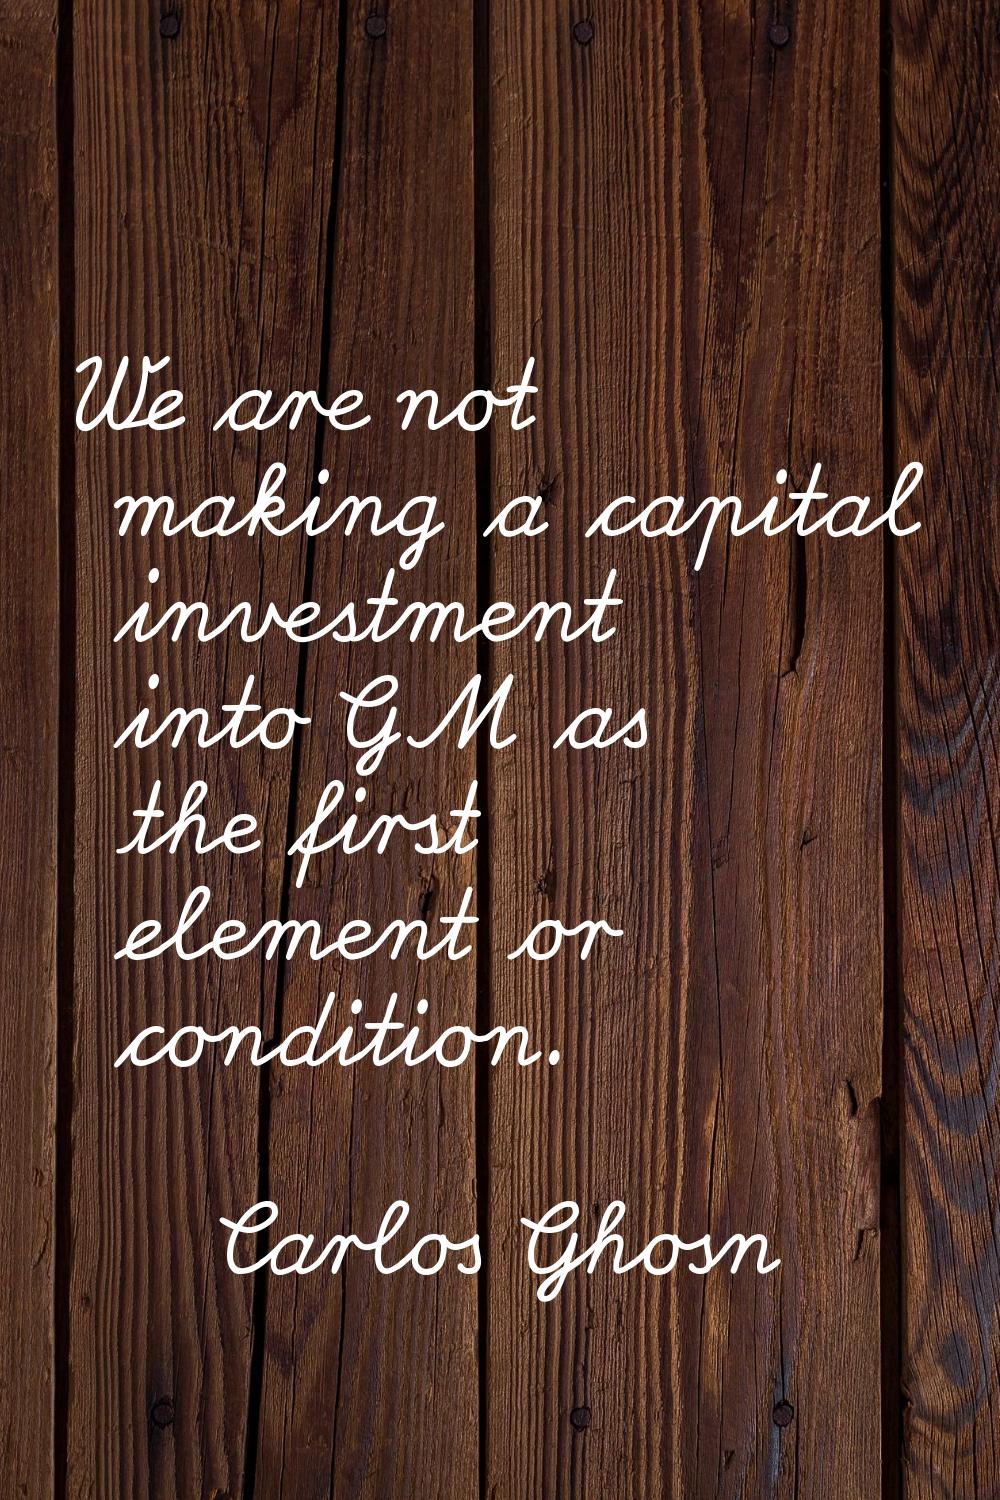 We are not making a capital investment into GM as the first element or condition.